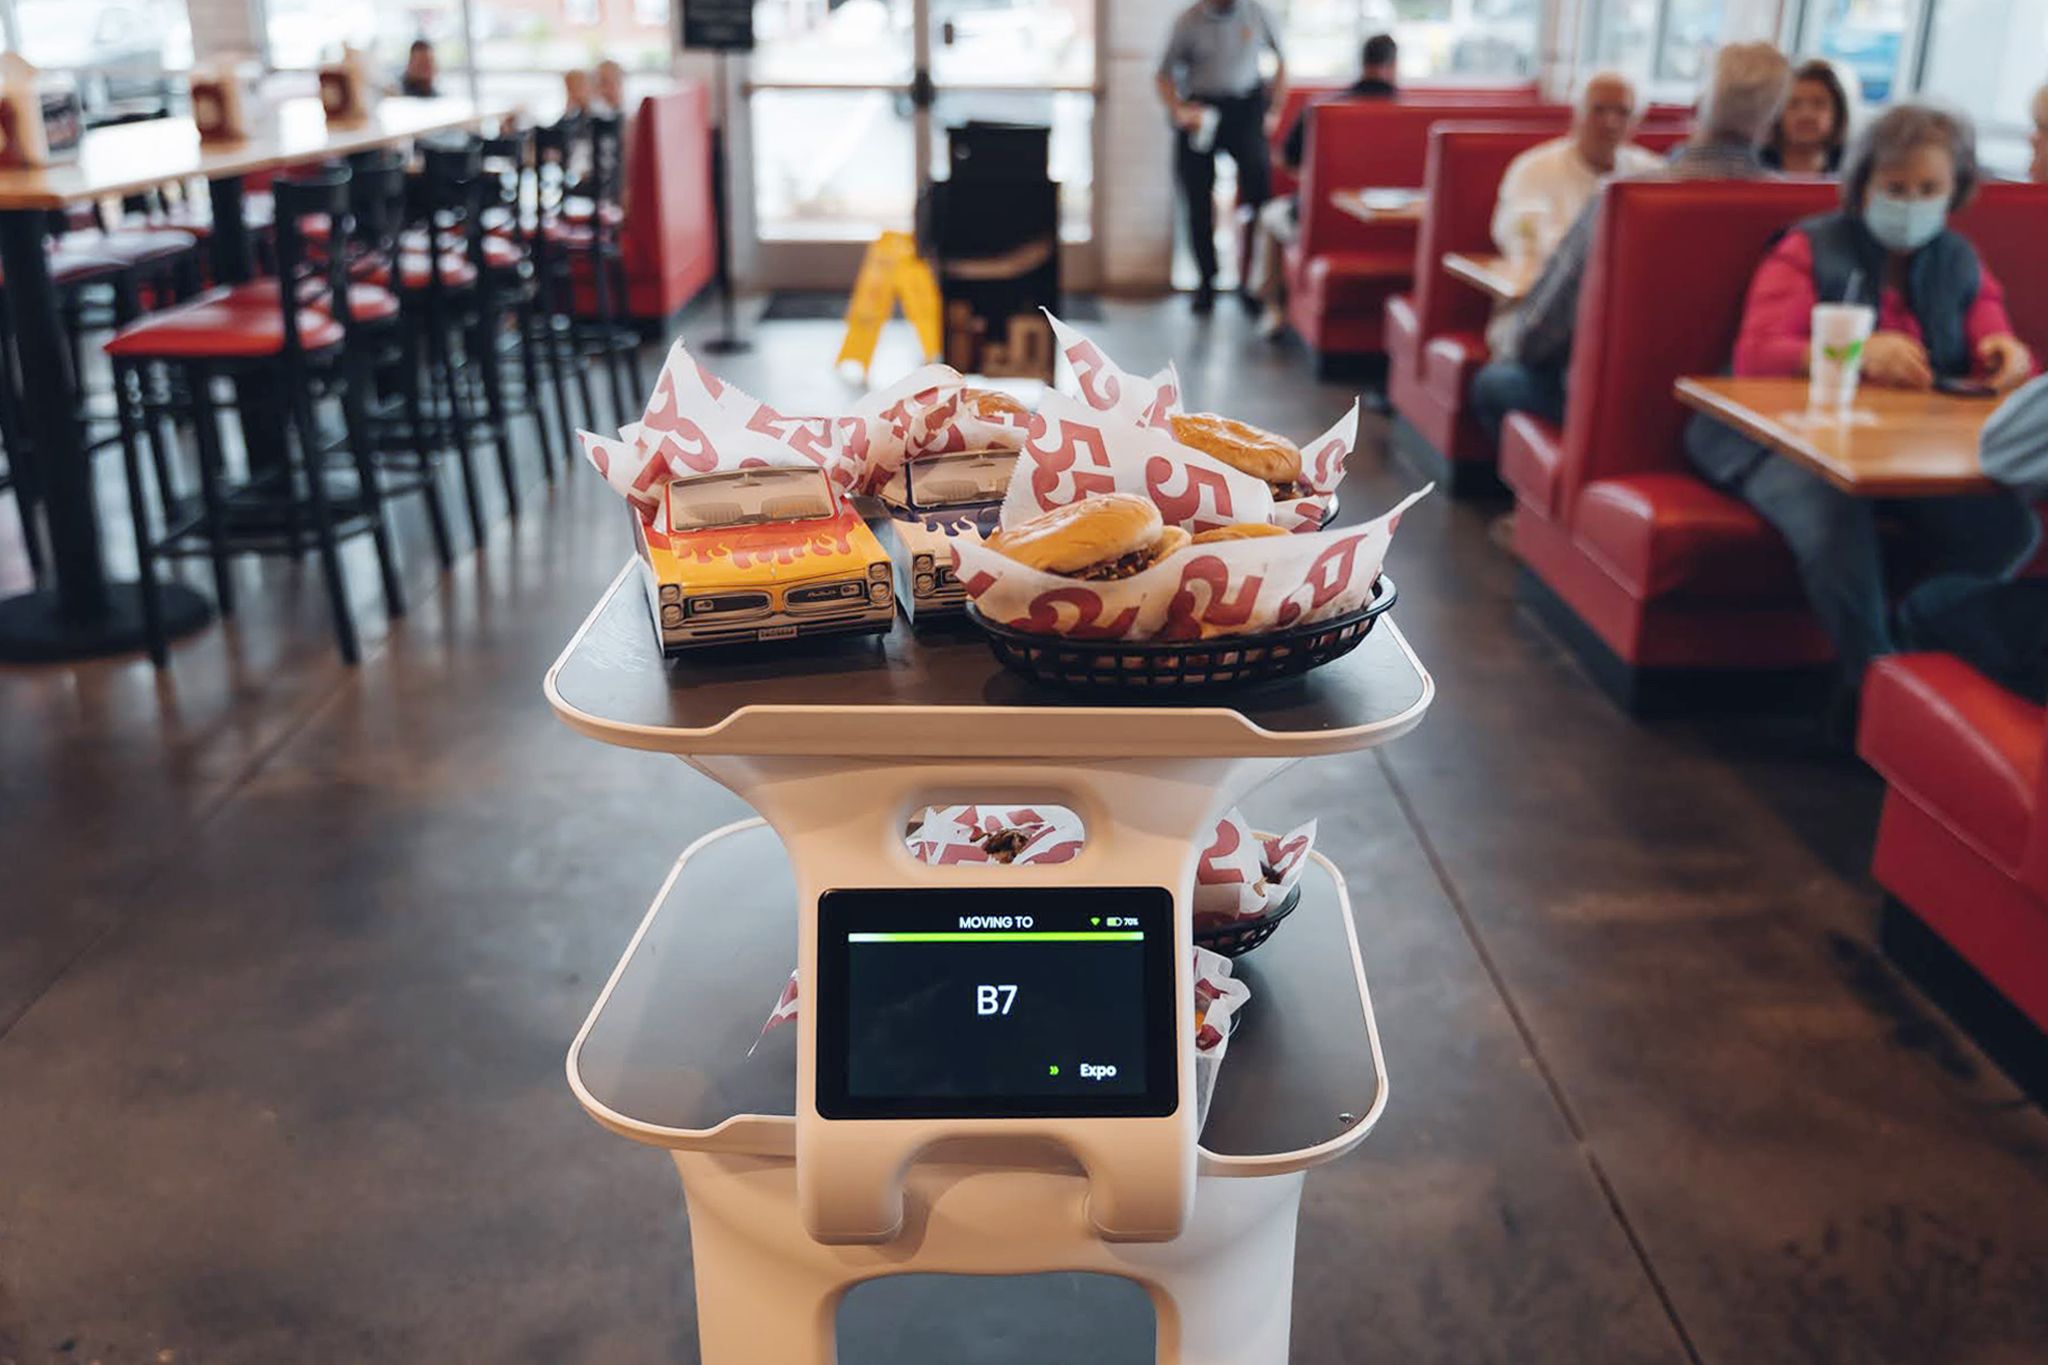 <strong>Robot runner:</strong> Robots aren't just serving diners in Asia. Servi by USA-based <a href="index.php?page=&url=https%3A%2F%2Fwww.bearrobotics.ai" target="_blank" target="_blank">Bear Robotics</a> is helping fast food chains like Chilli's, Denny's and Highway 55 (pictured) offer slicker service amid staff shortages. By running orders from the kitchen to tables, it allows human staff to focus on more skilled tasks. The autonomous robots are also providing support in retirement homes and elderly care centers.